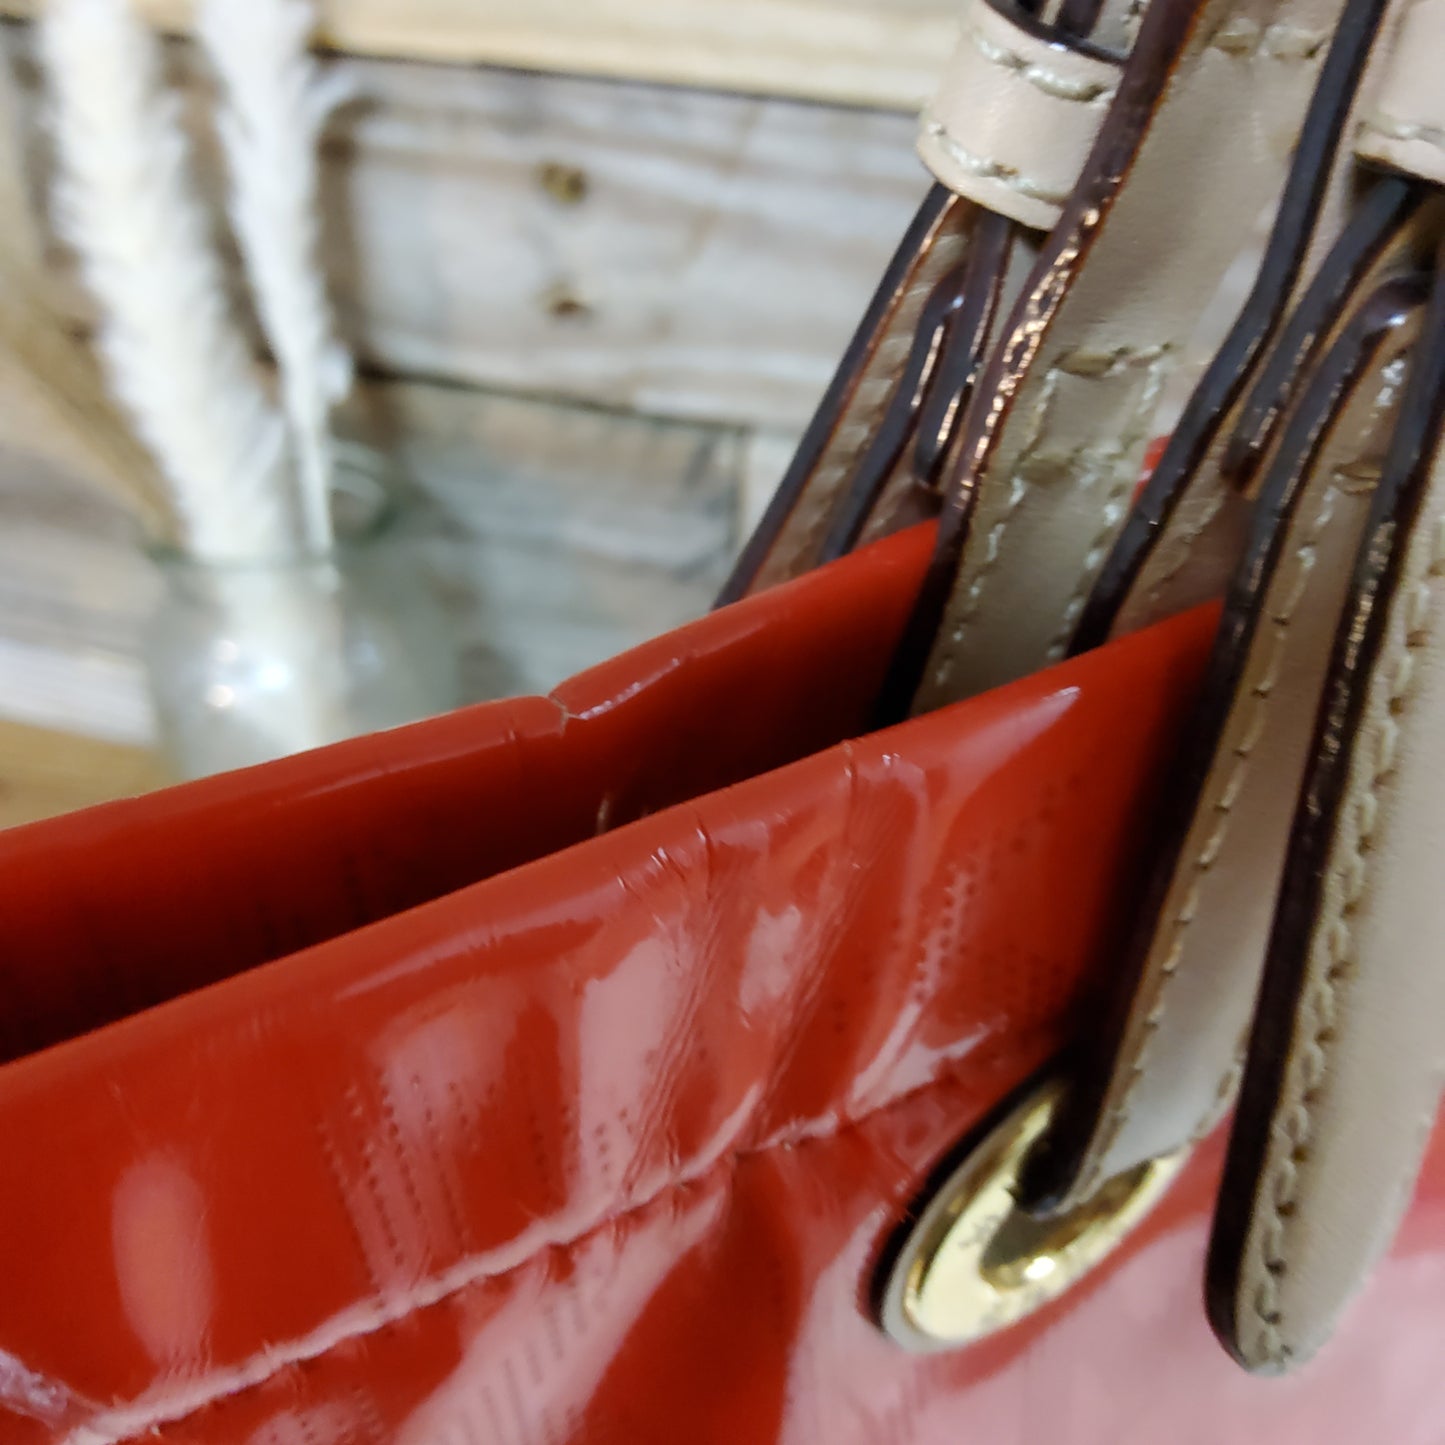 Michael Kors Red Patent Leather Tote